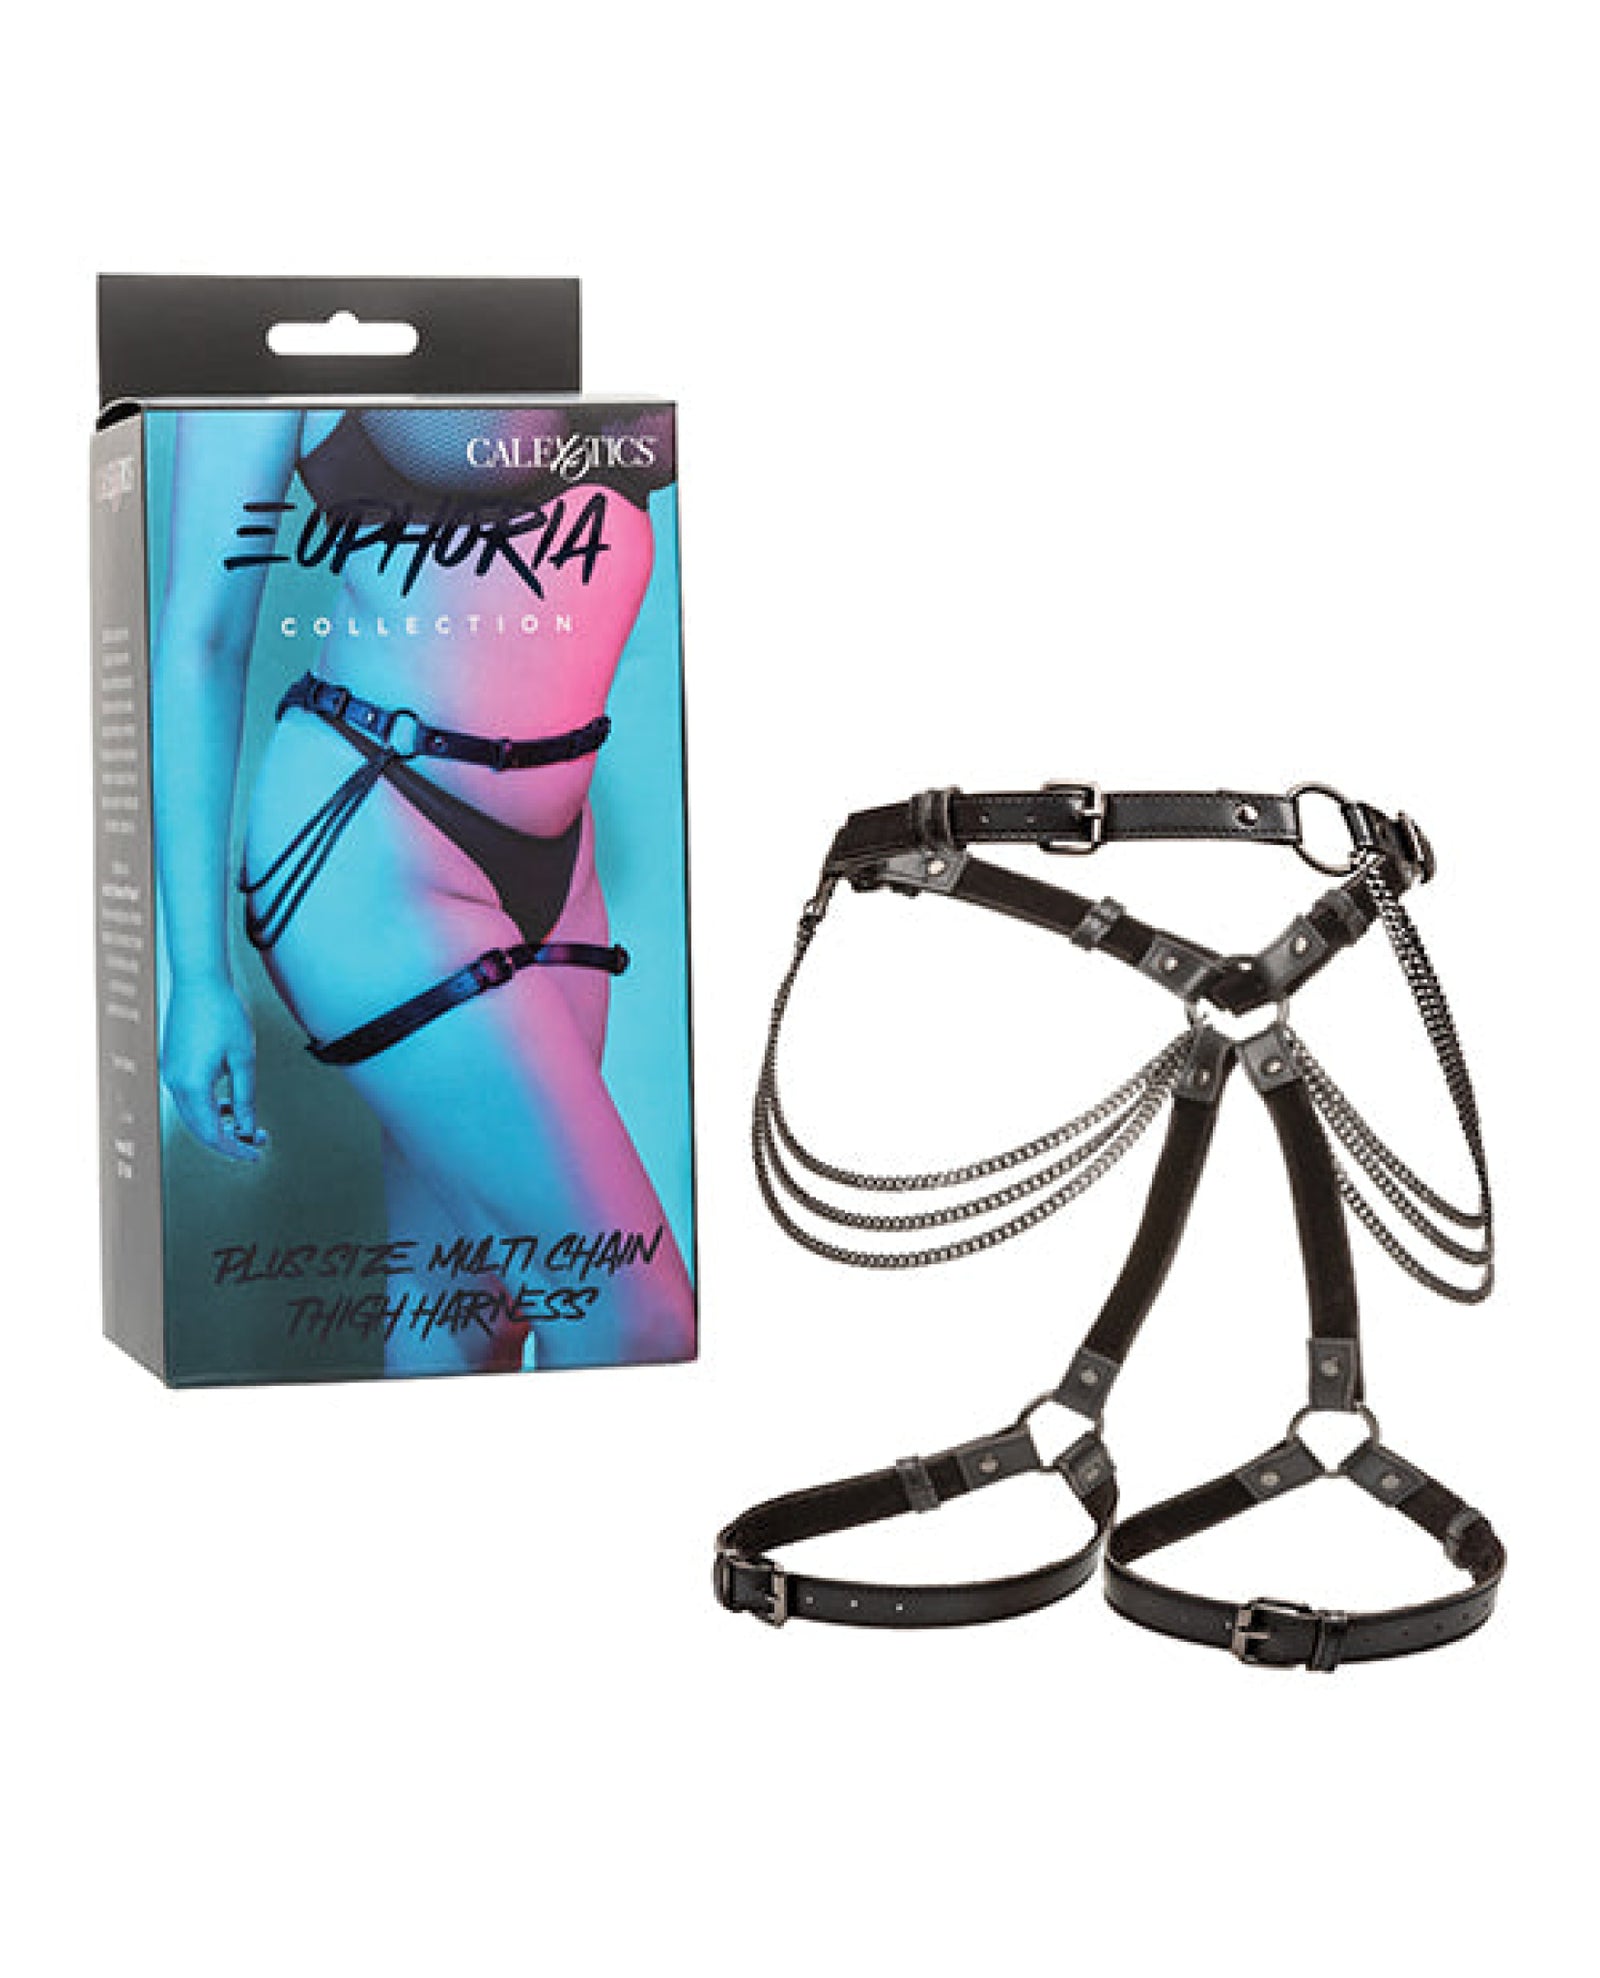 Euphoria Collection Plus Size Multi Chain Thigh Harness California Exotic Novelties